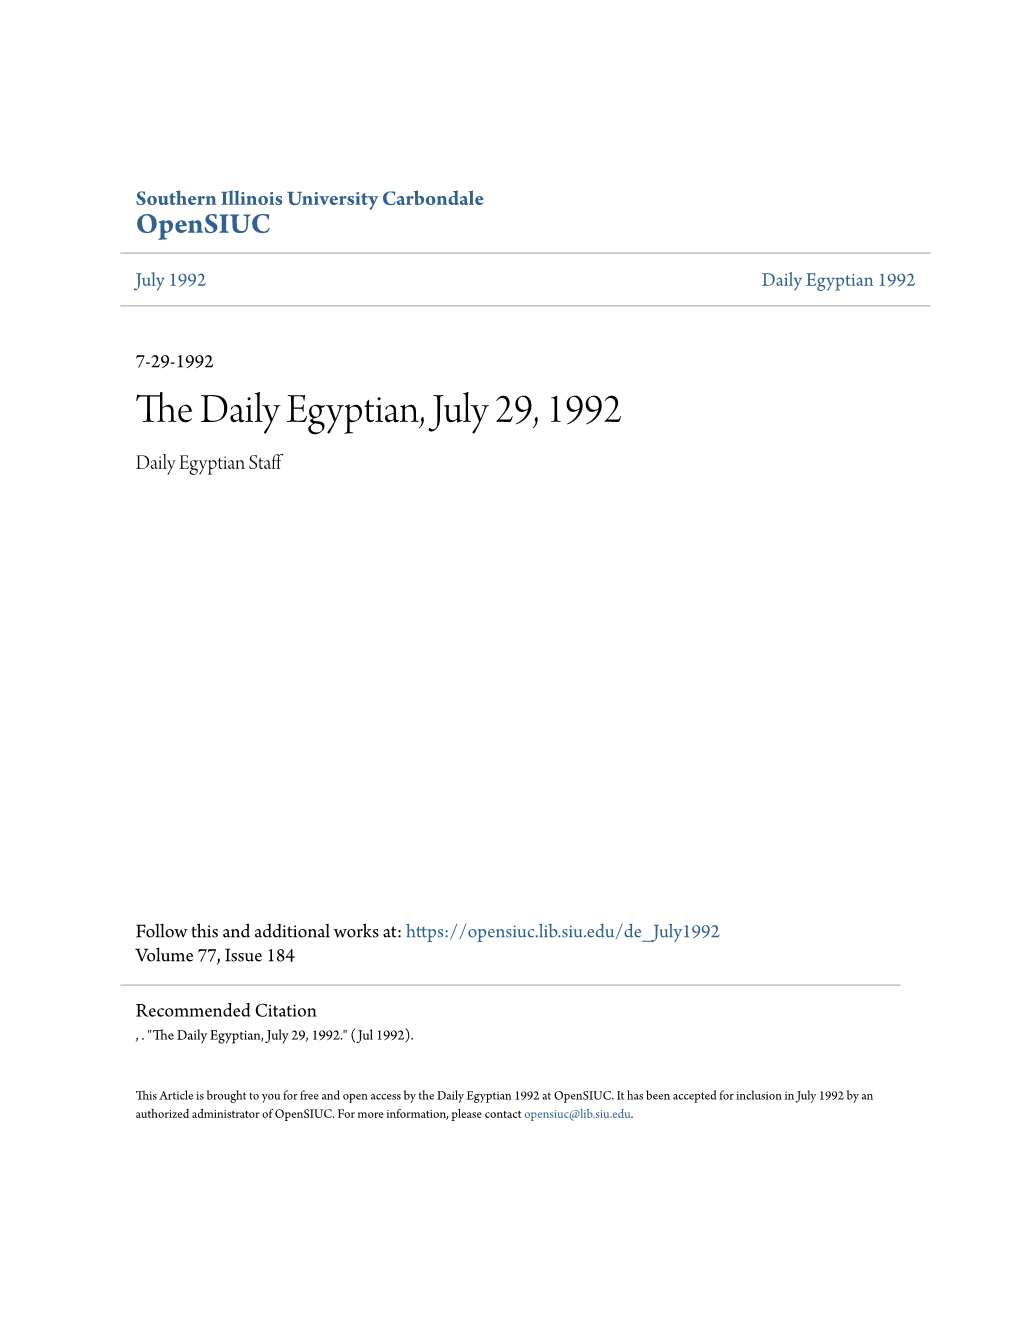 The Daily Egyptian, July 29, 1992